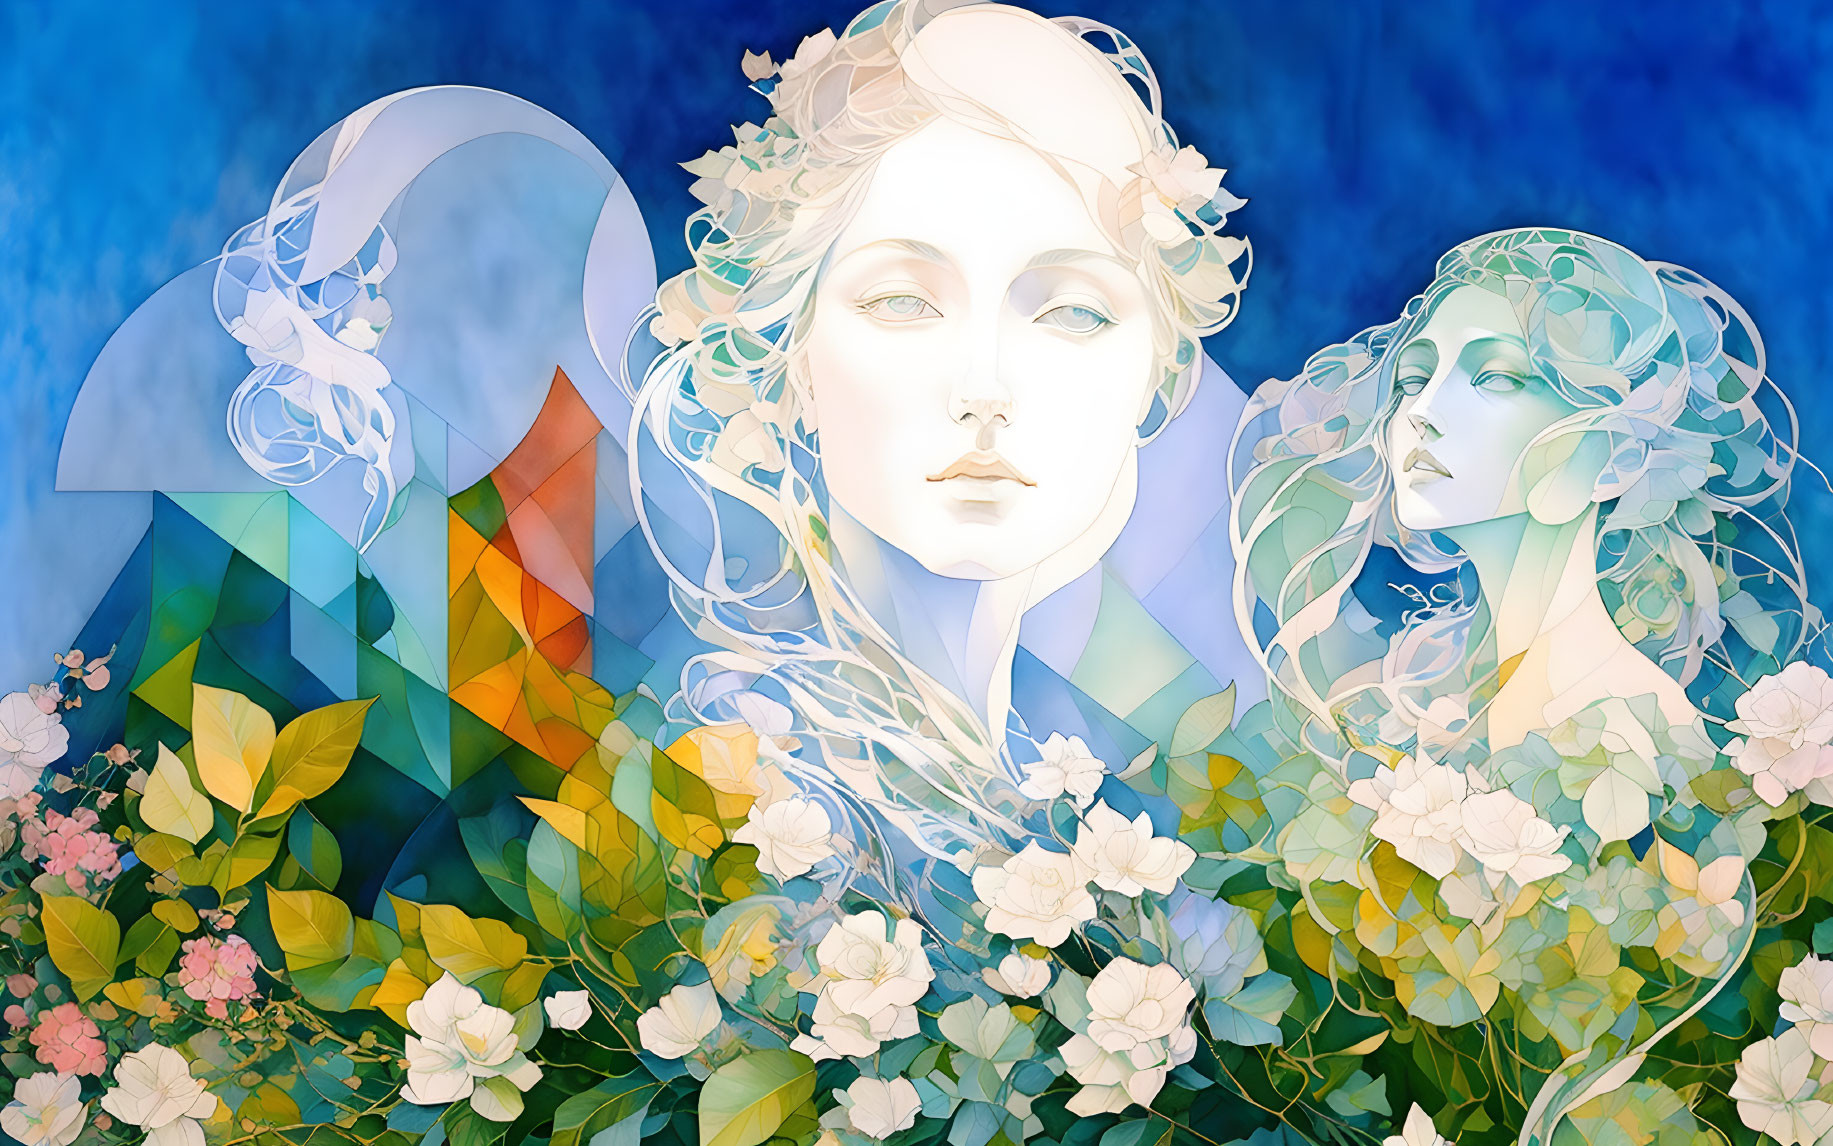 Stylized female figures in colorful floral scene on blue backdrop